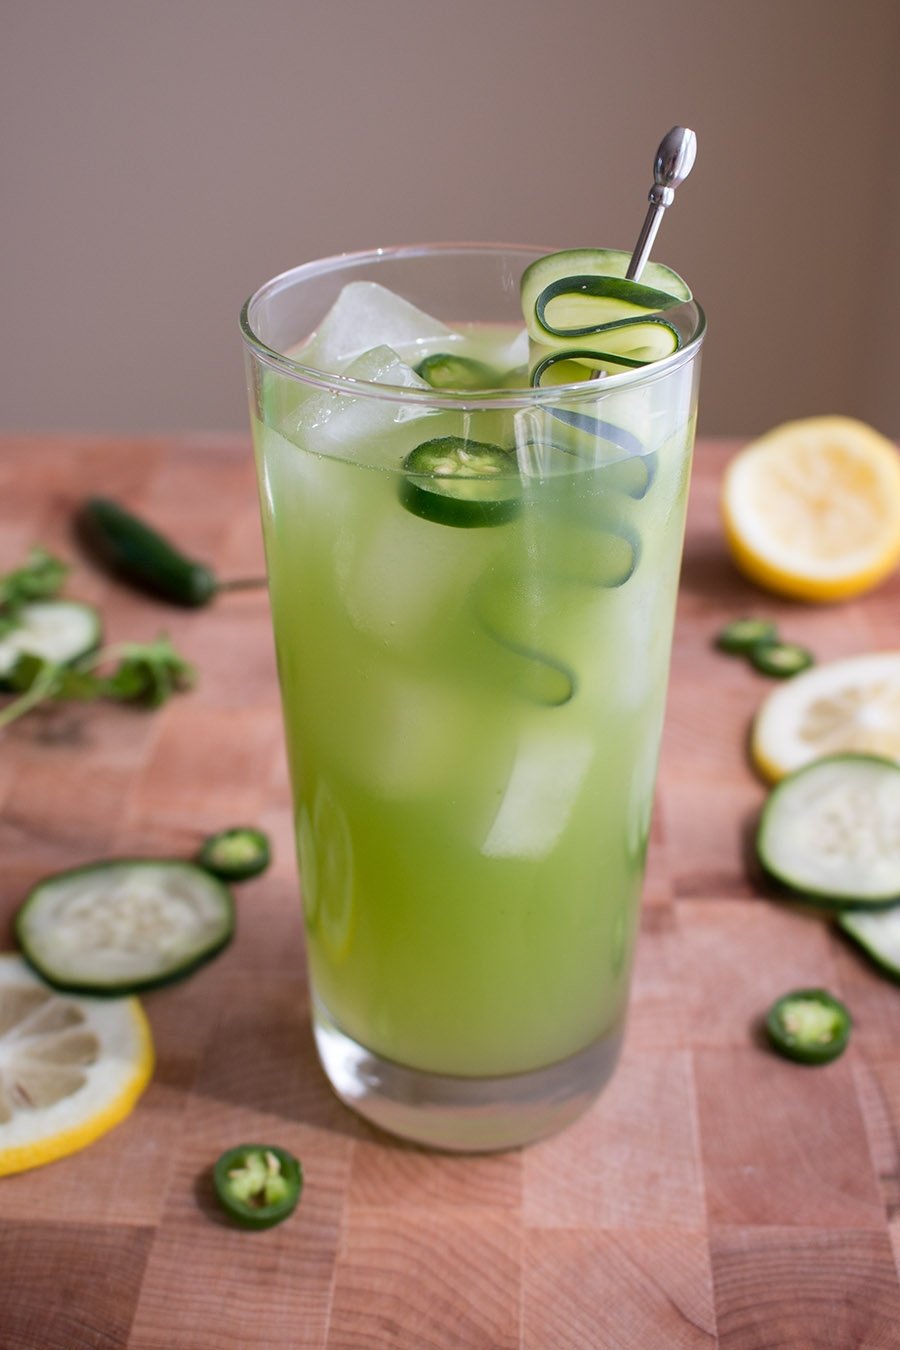 Spicy Cucumber Cocktail served in a glass